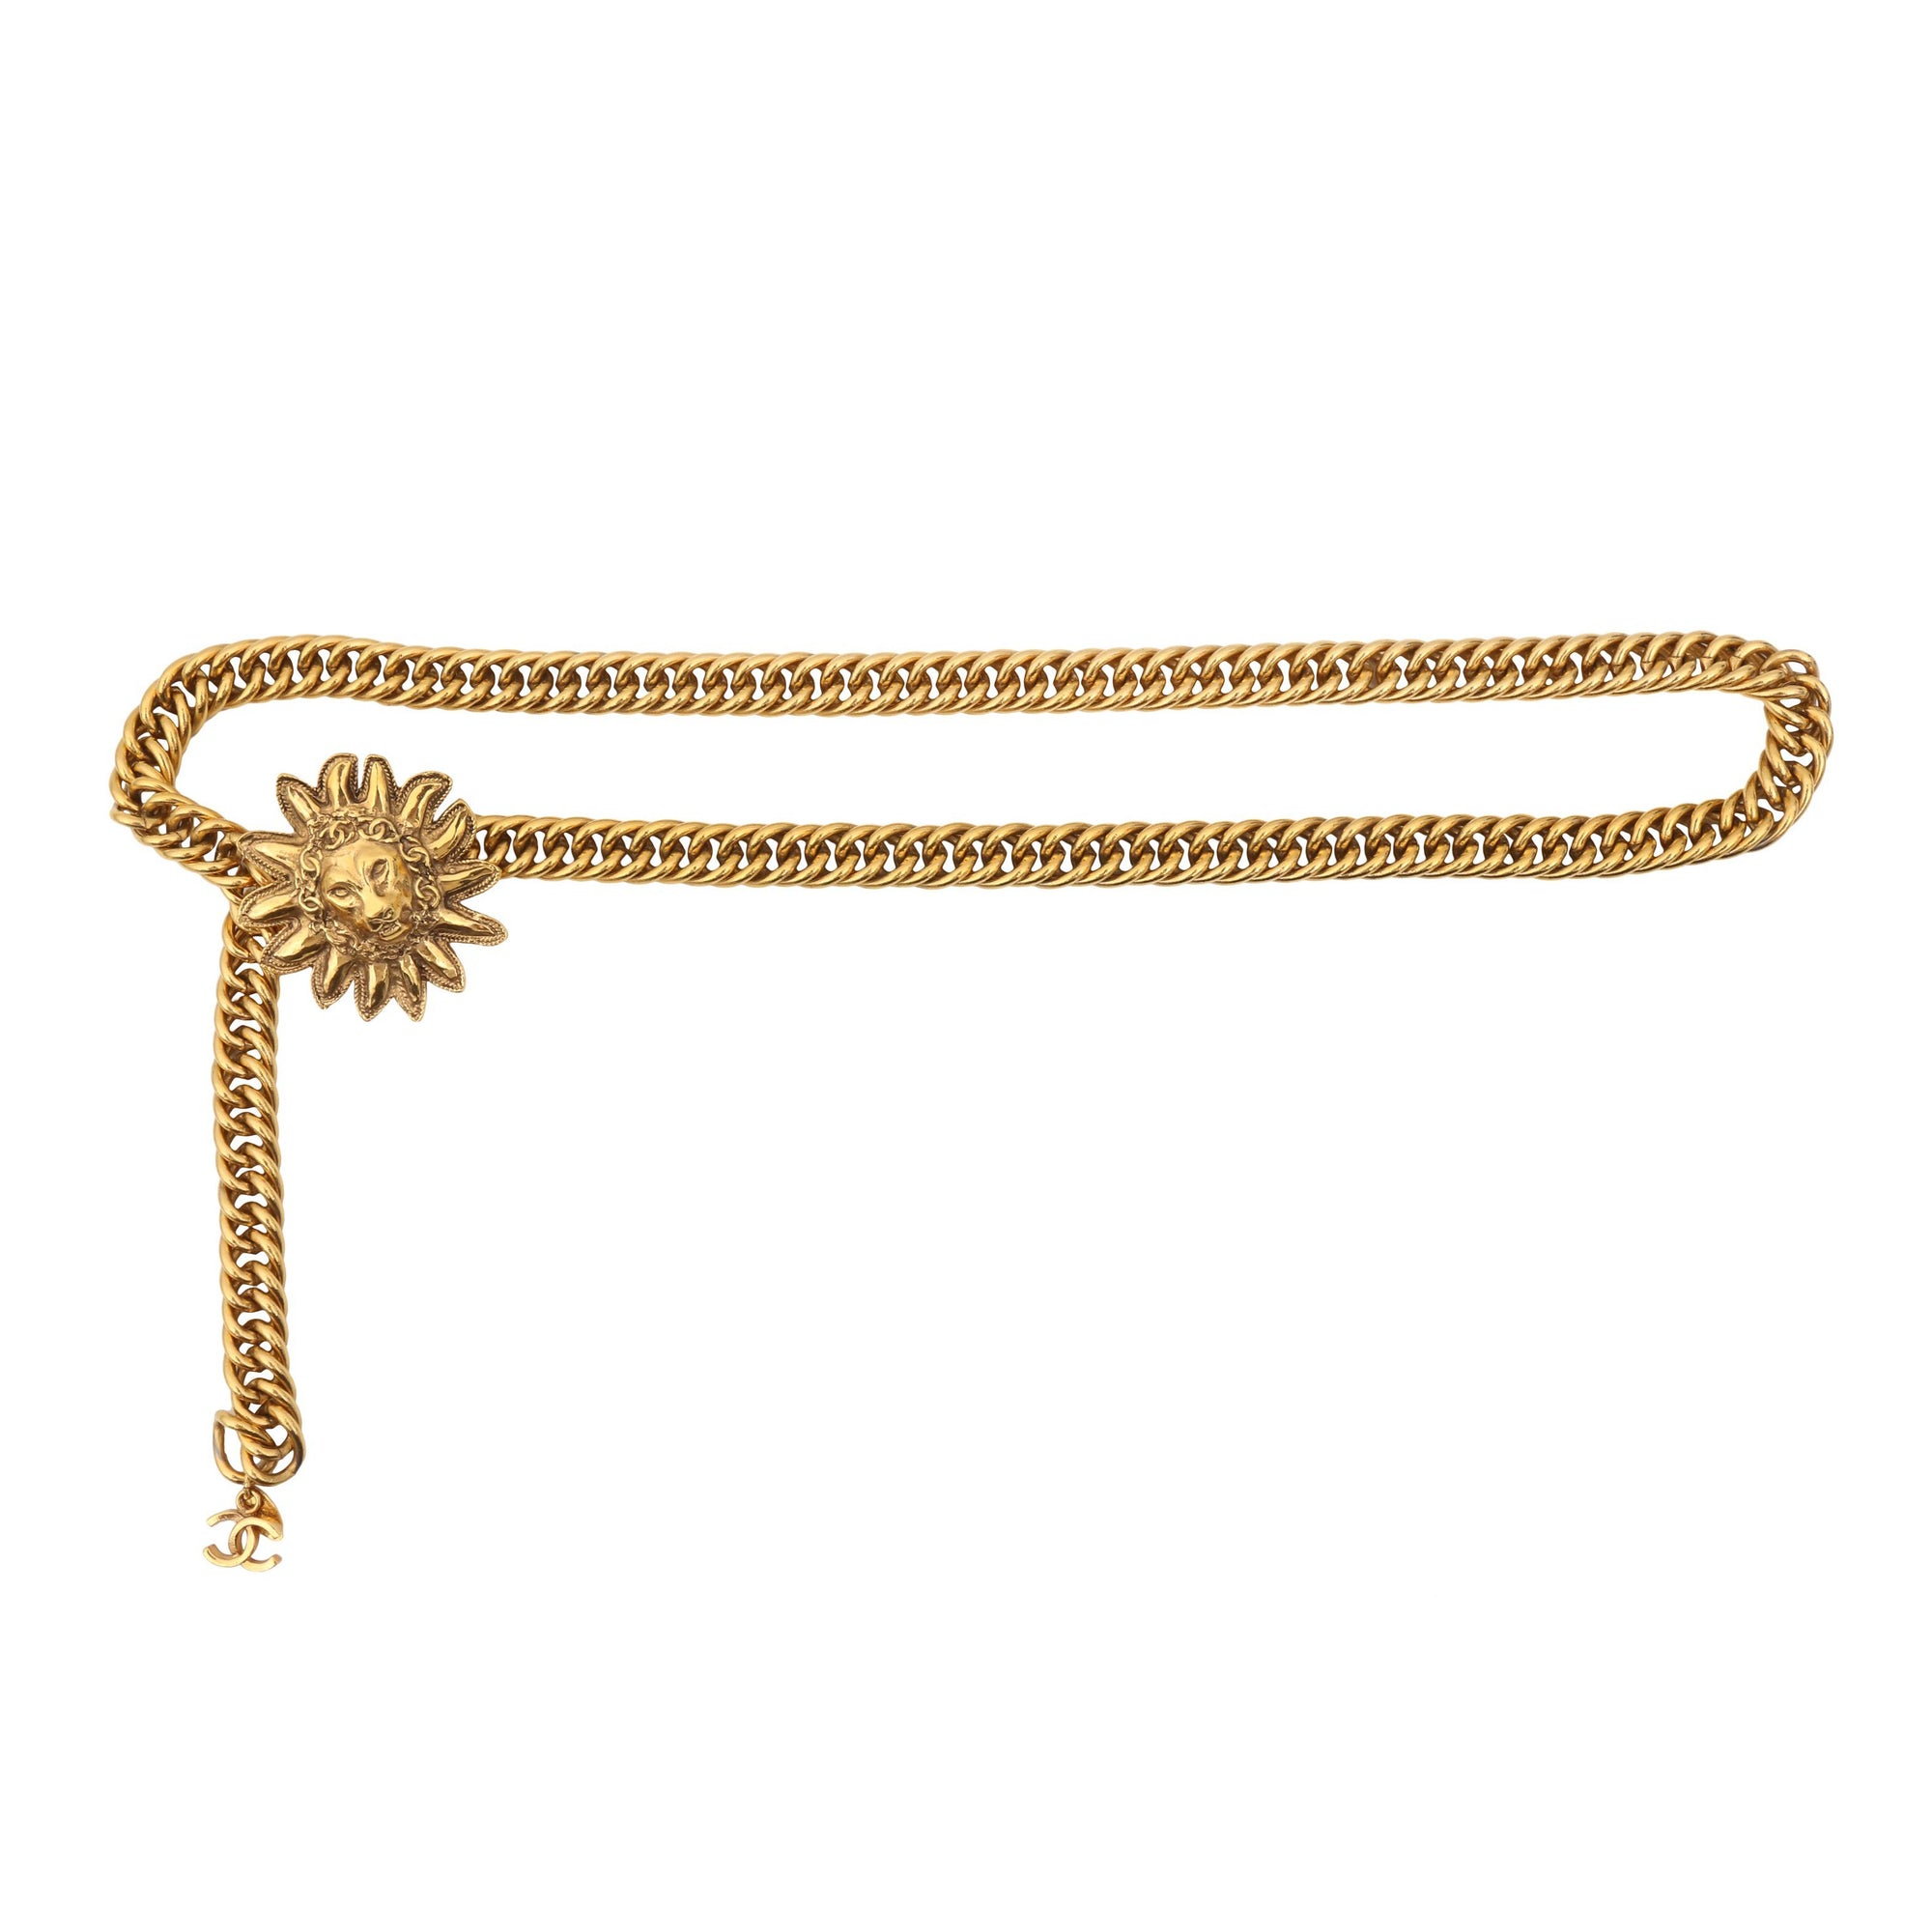 Vintage CHANEL Golden Thick Chain Belt With a CC Charm and 